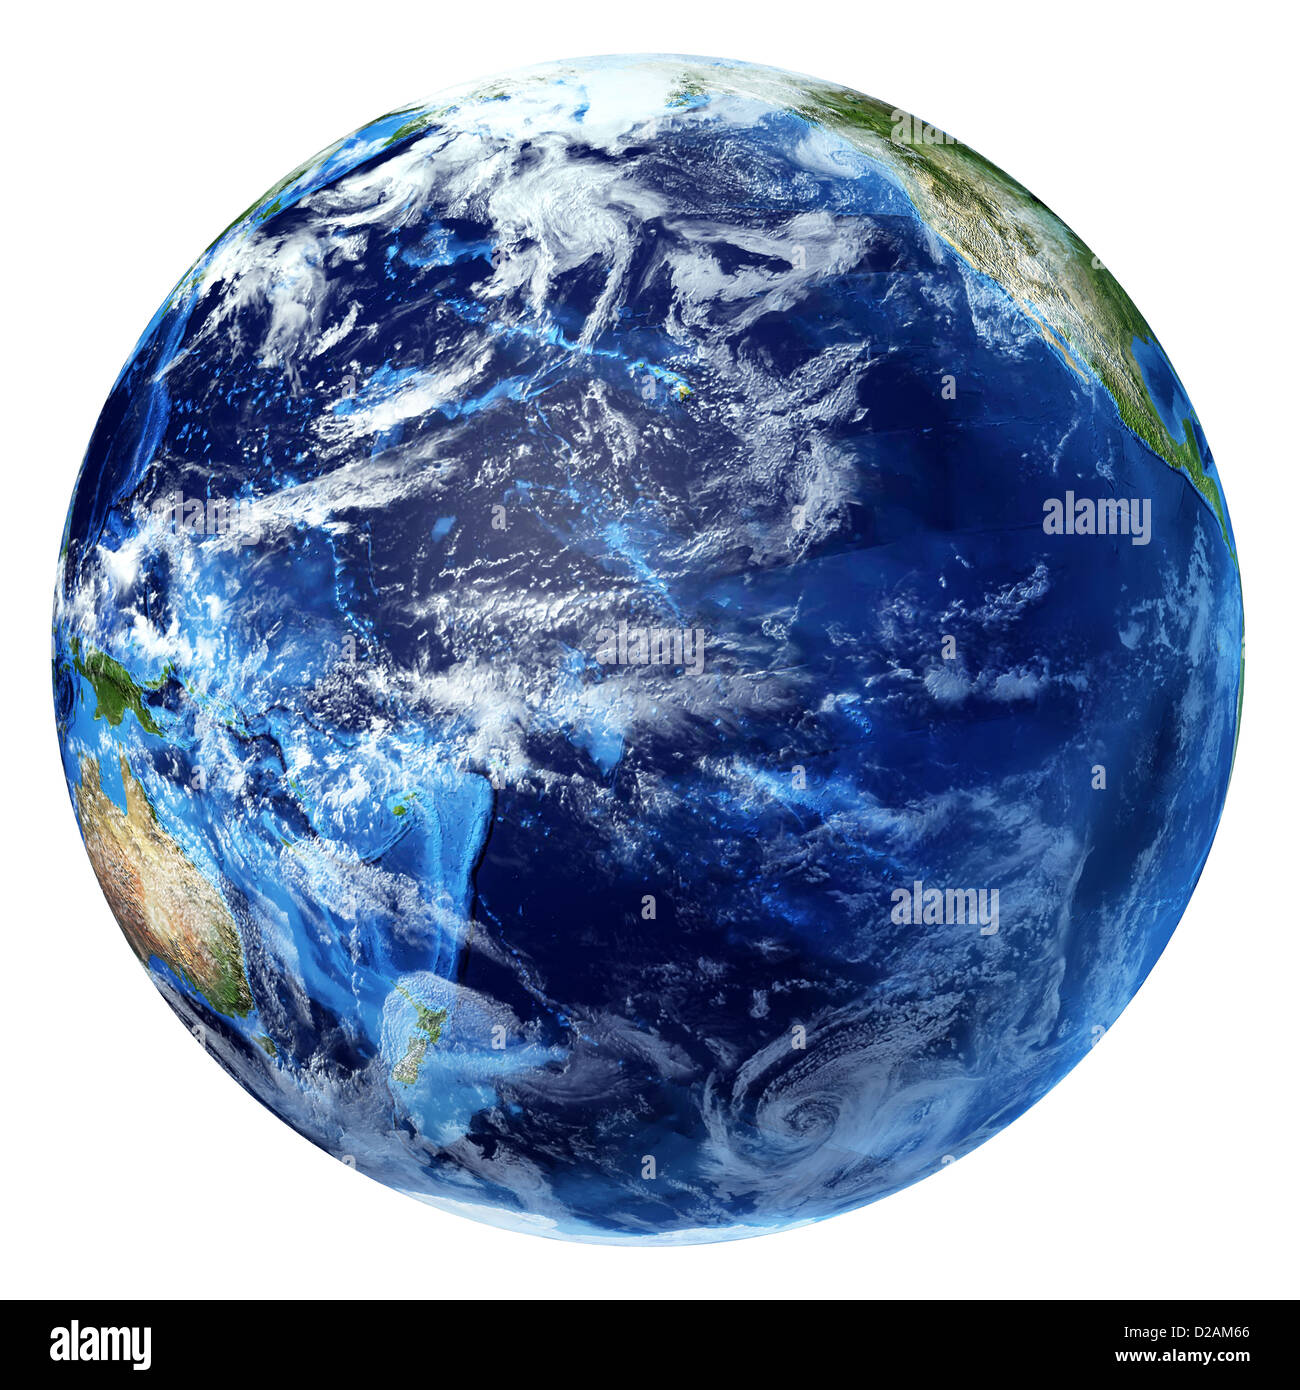 Planet earth with some clouds. Pacific ocean view. On white background. Stock Photo